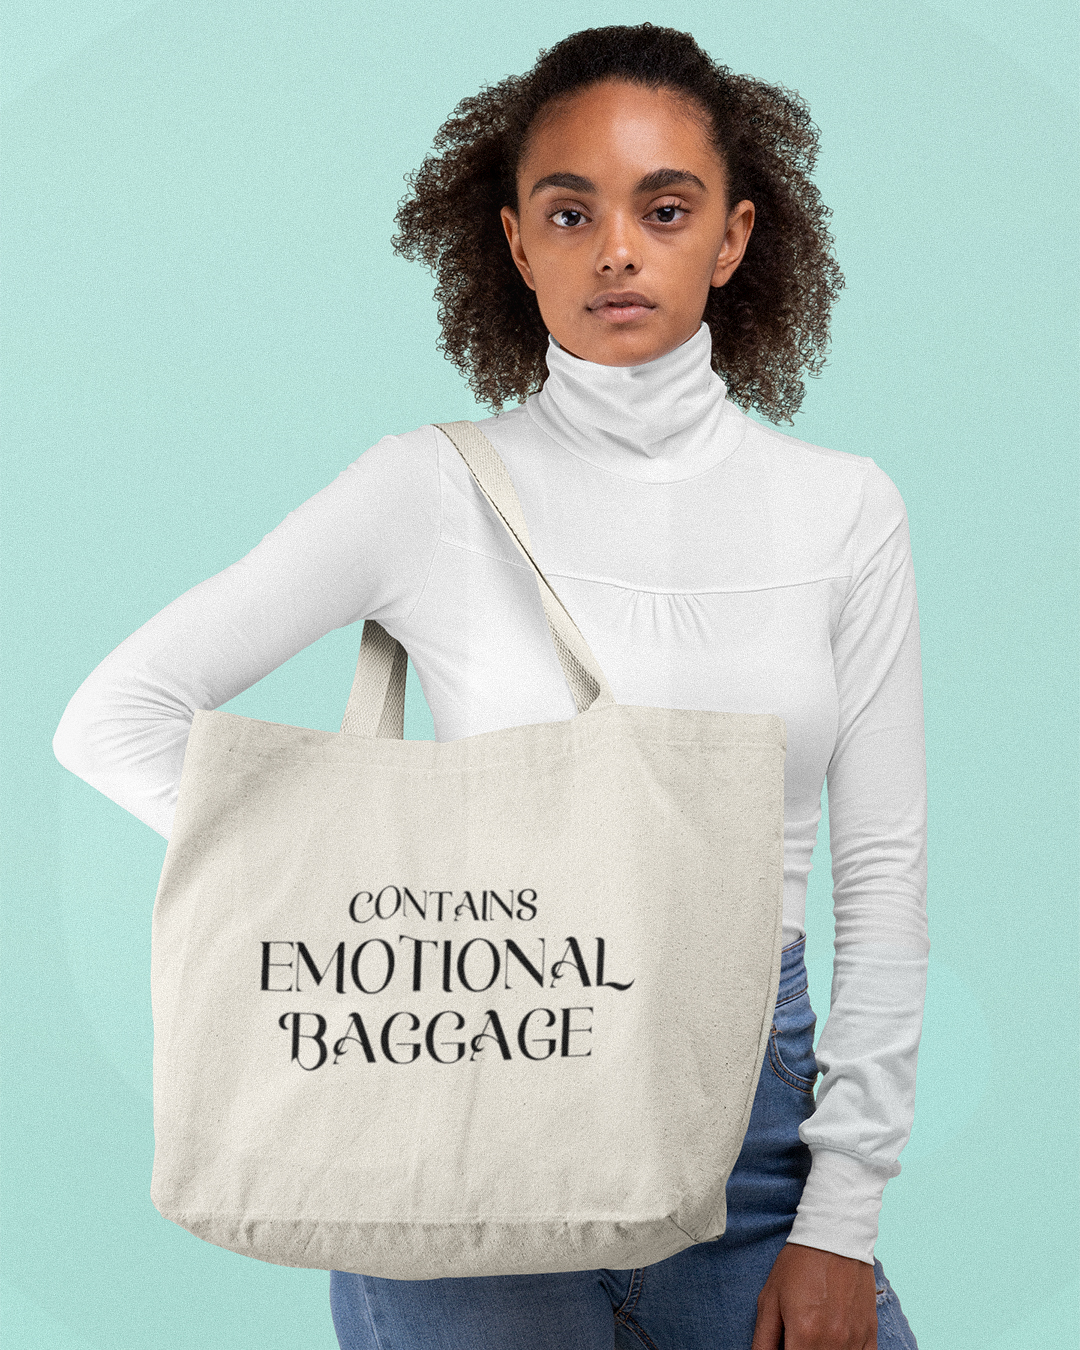 Contains Emotional Baggage Tote Bag - Funny Tote Bags Shopper - Contains Emotional Baggage Tote Bag Shopper